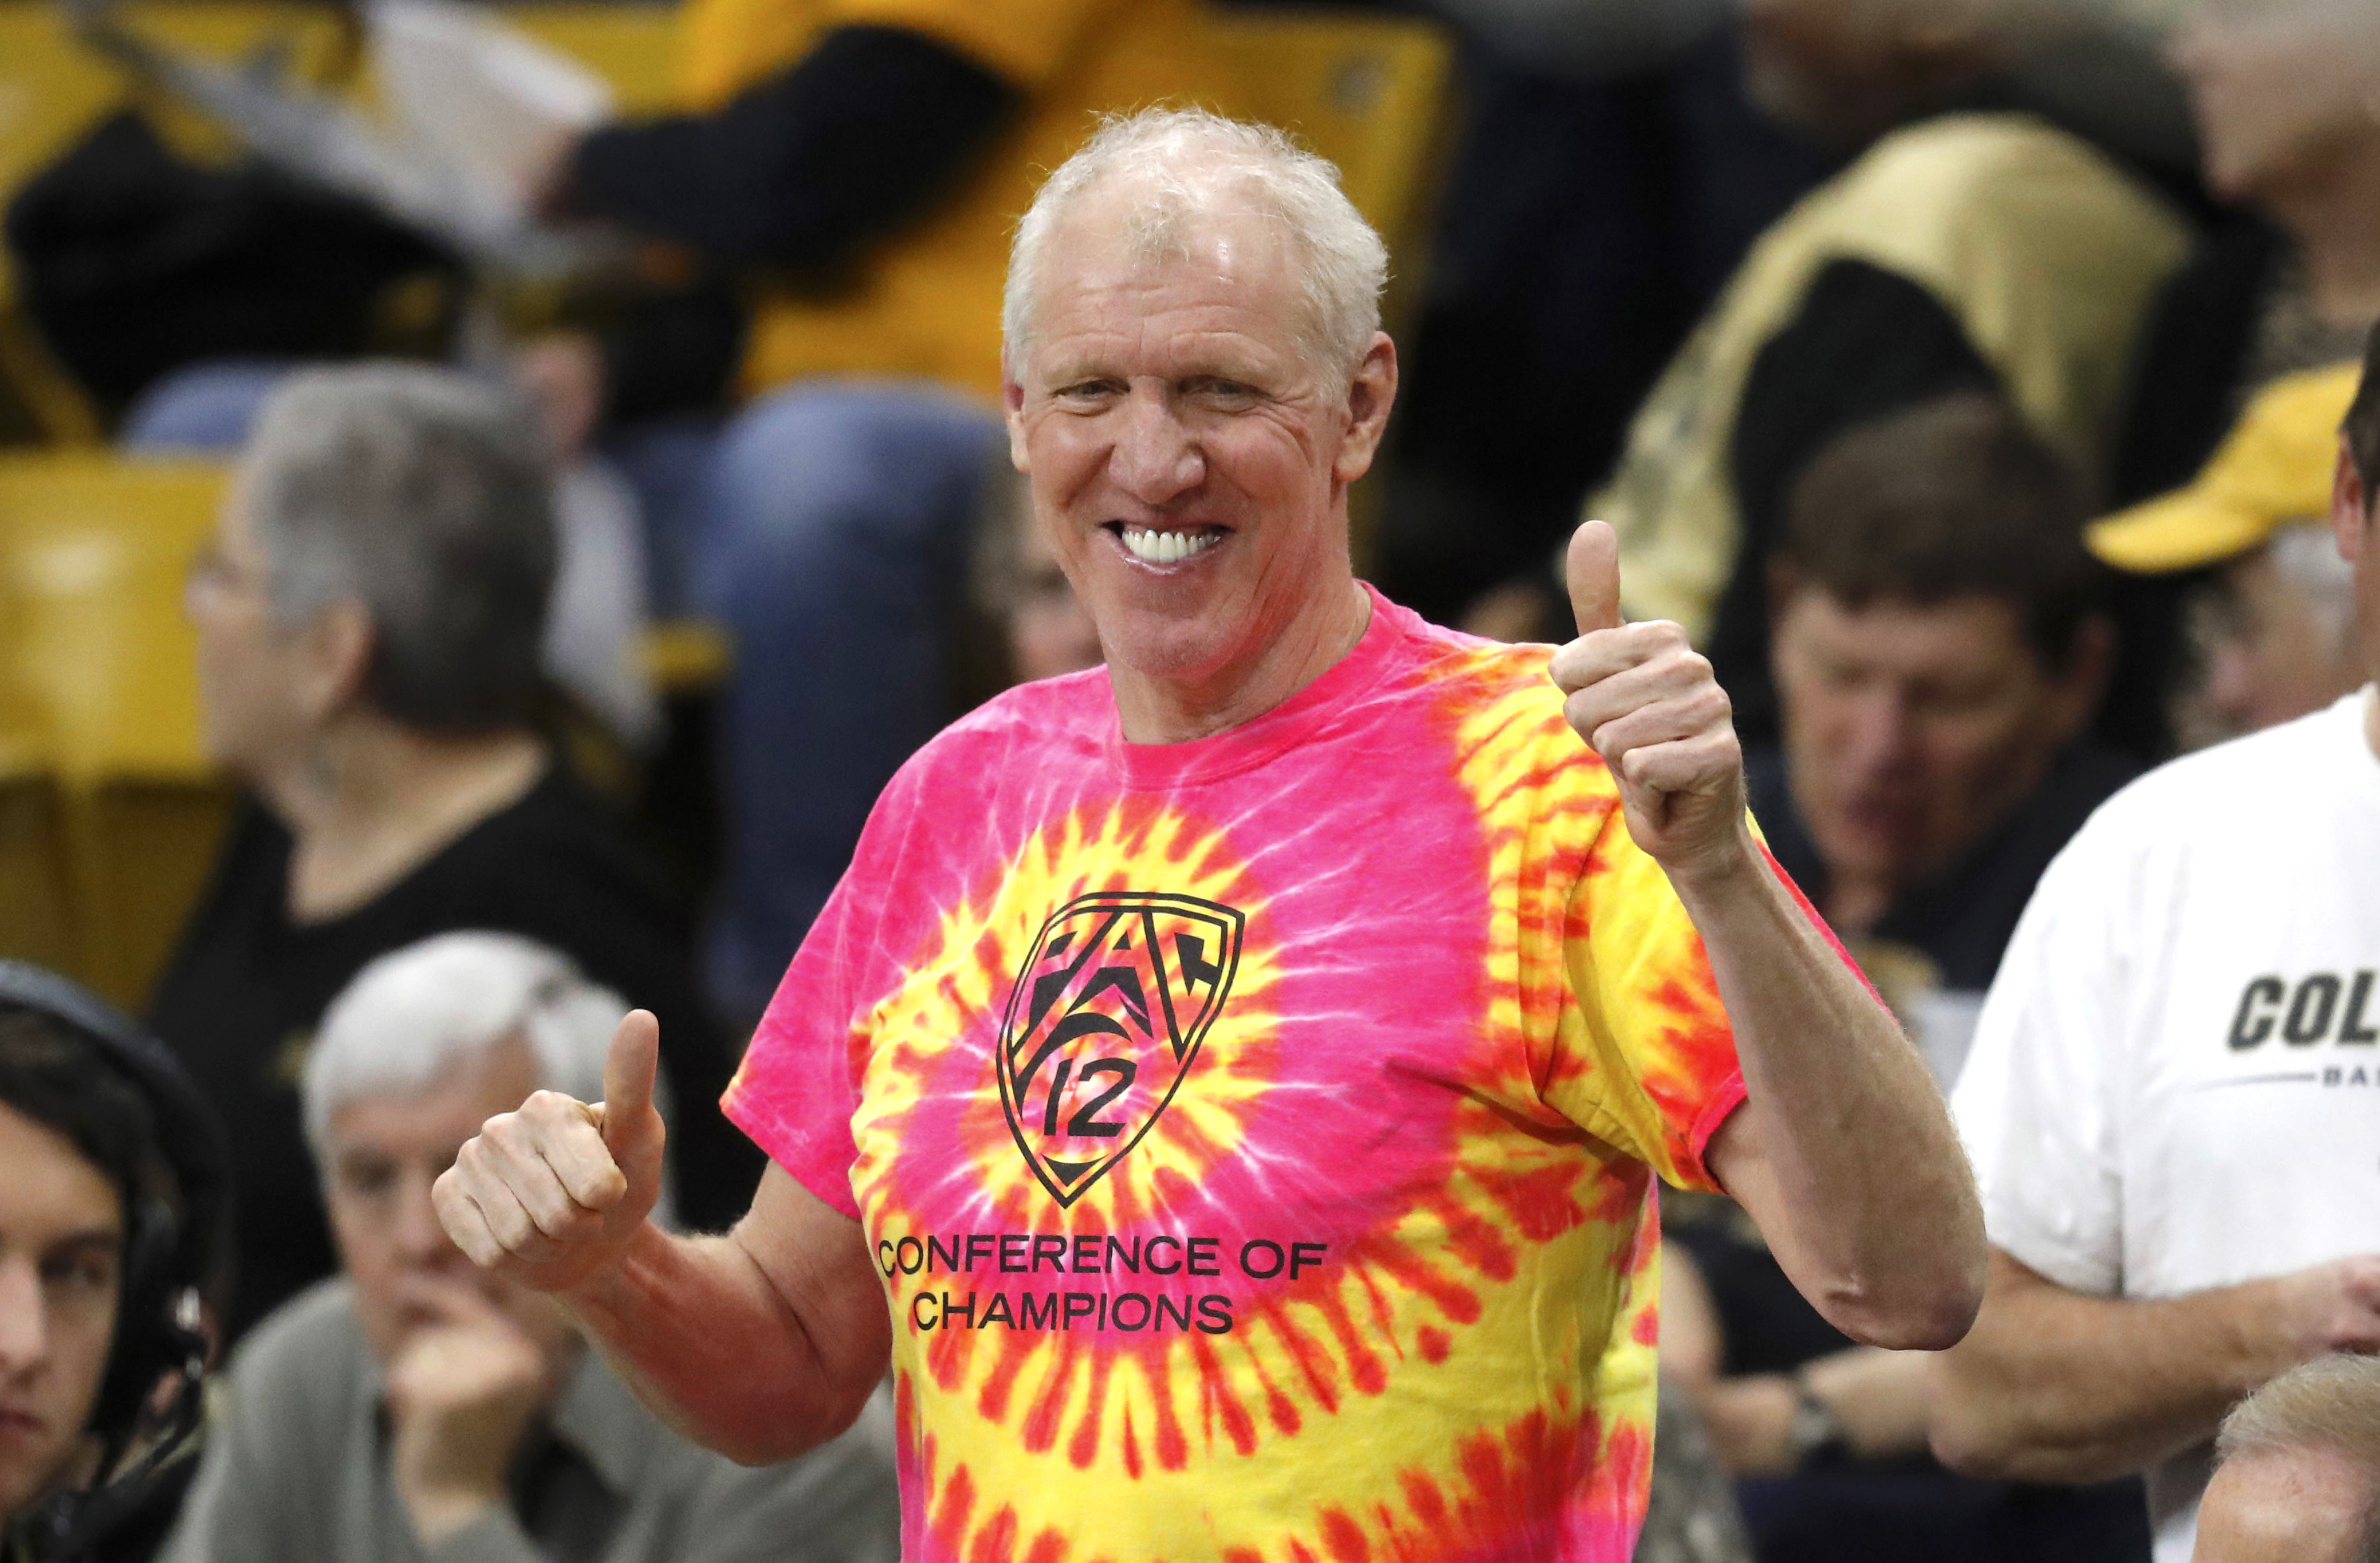 Bill Walton: The Luckiest Guy in the World? - HubPages